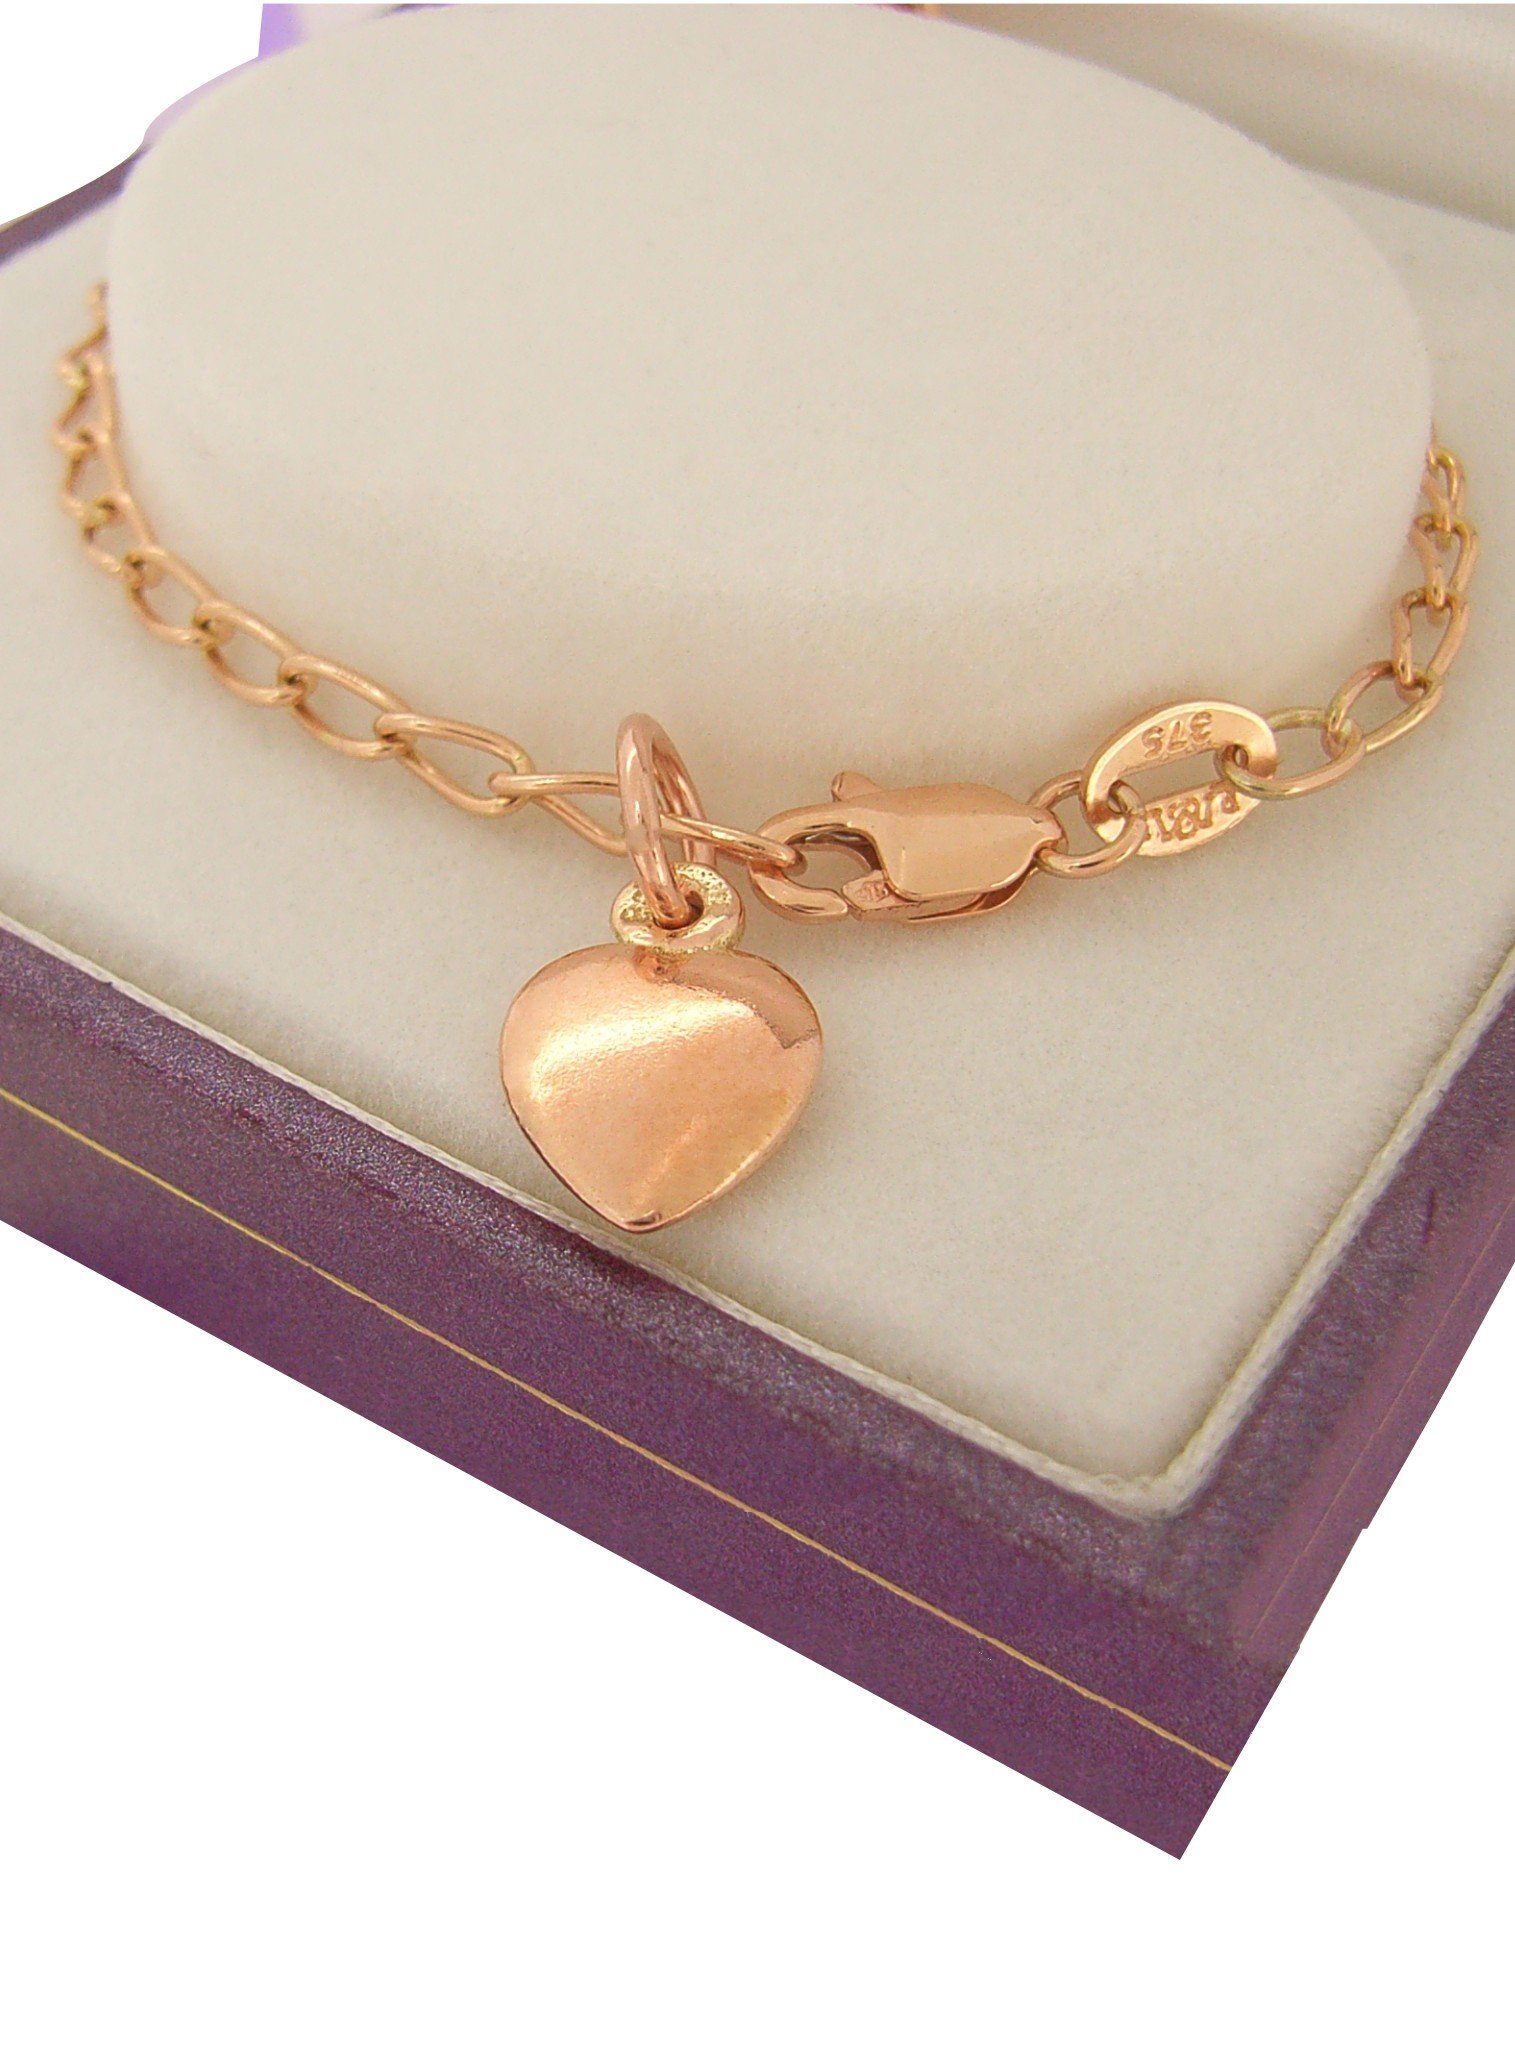 9CT GOLD CHARM BRACELET FLAT D//C CURB LINK HEART PADLOCK CHARMS SAFETY CHAIN BOX